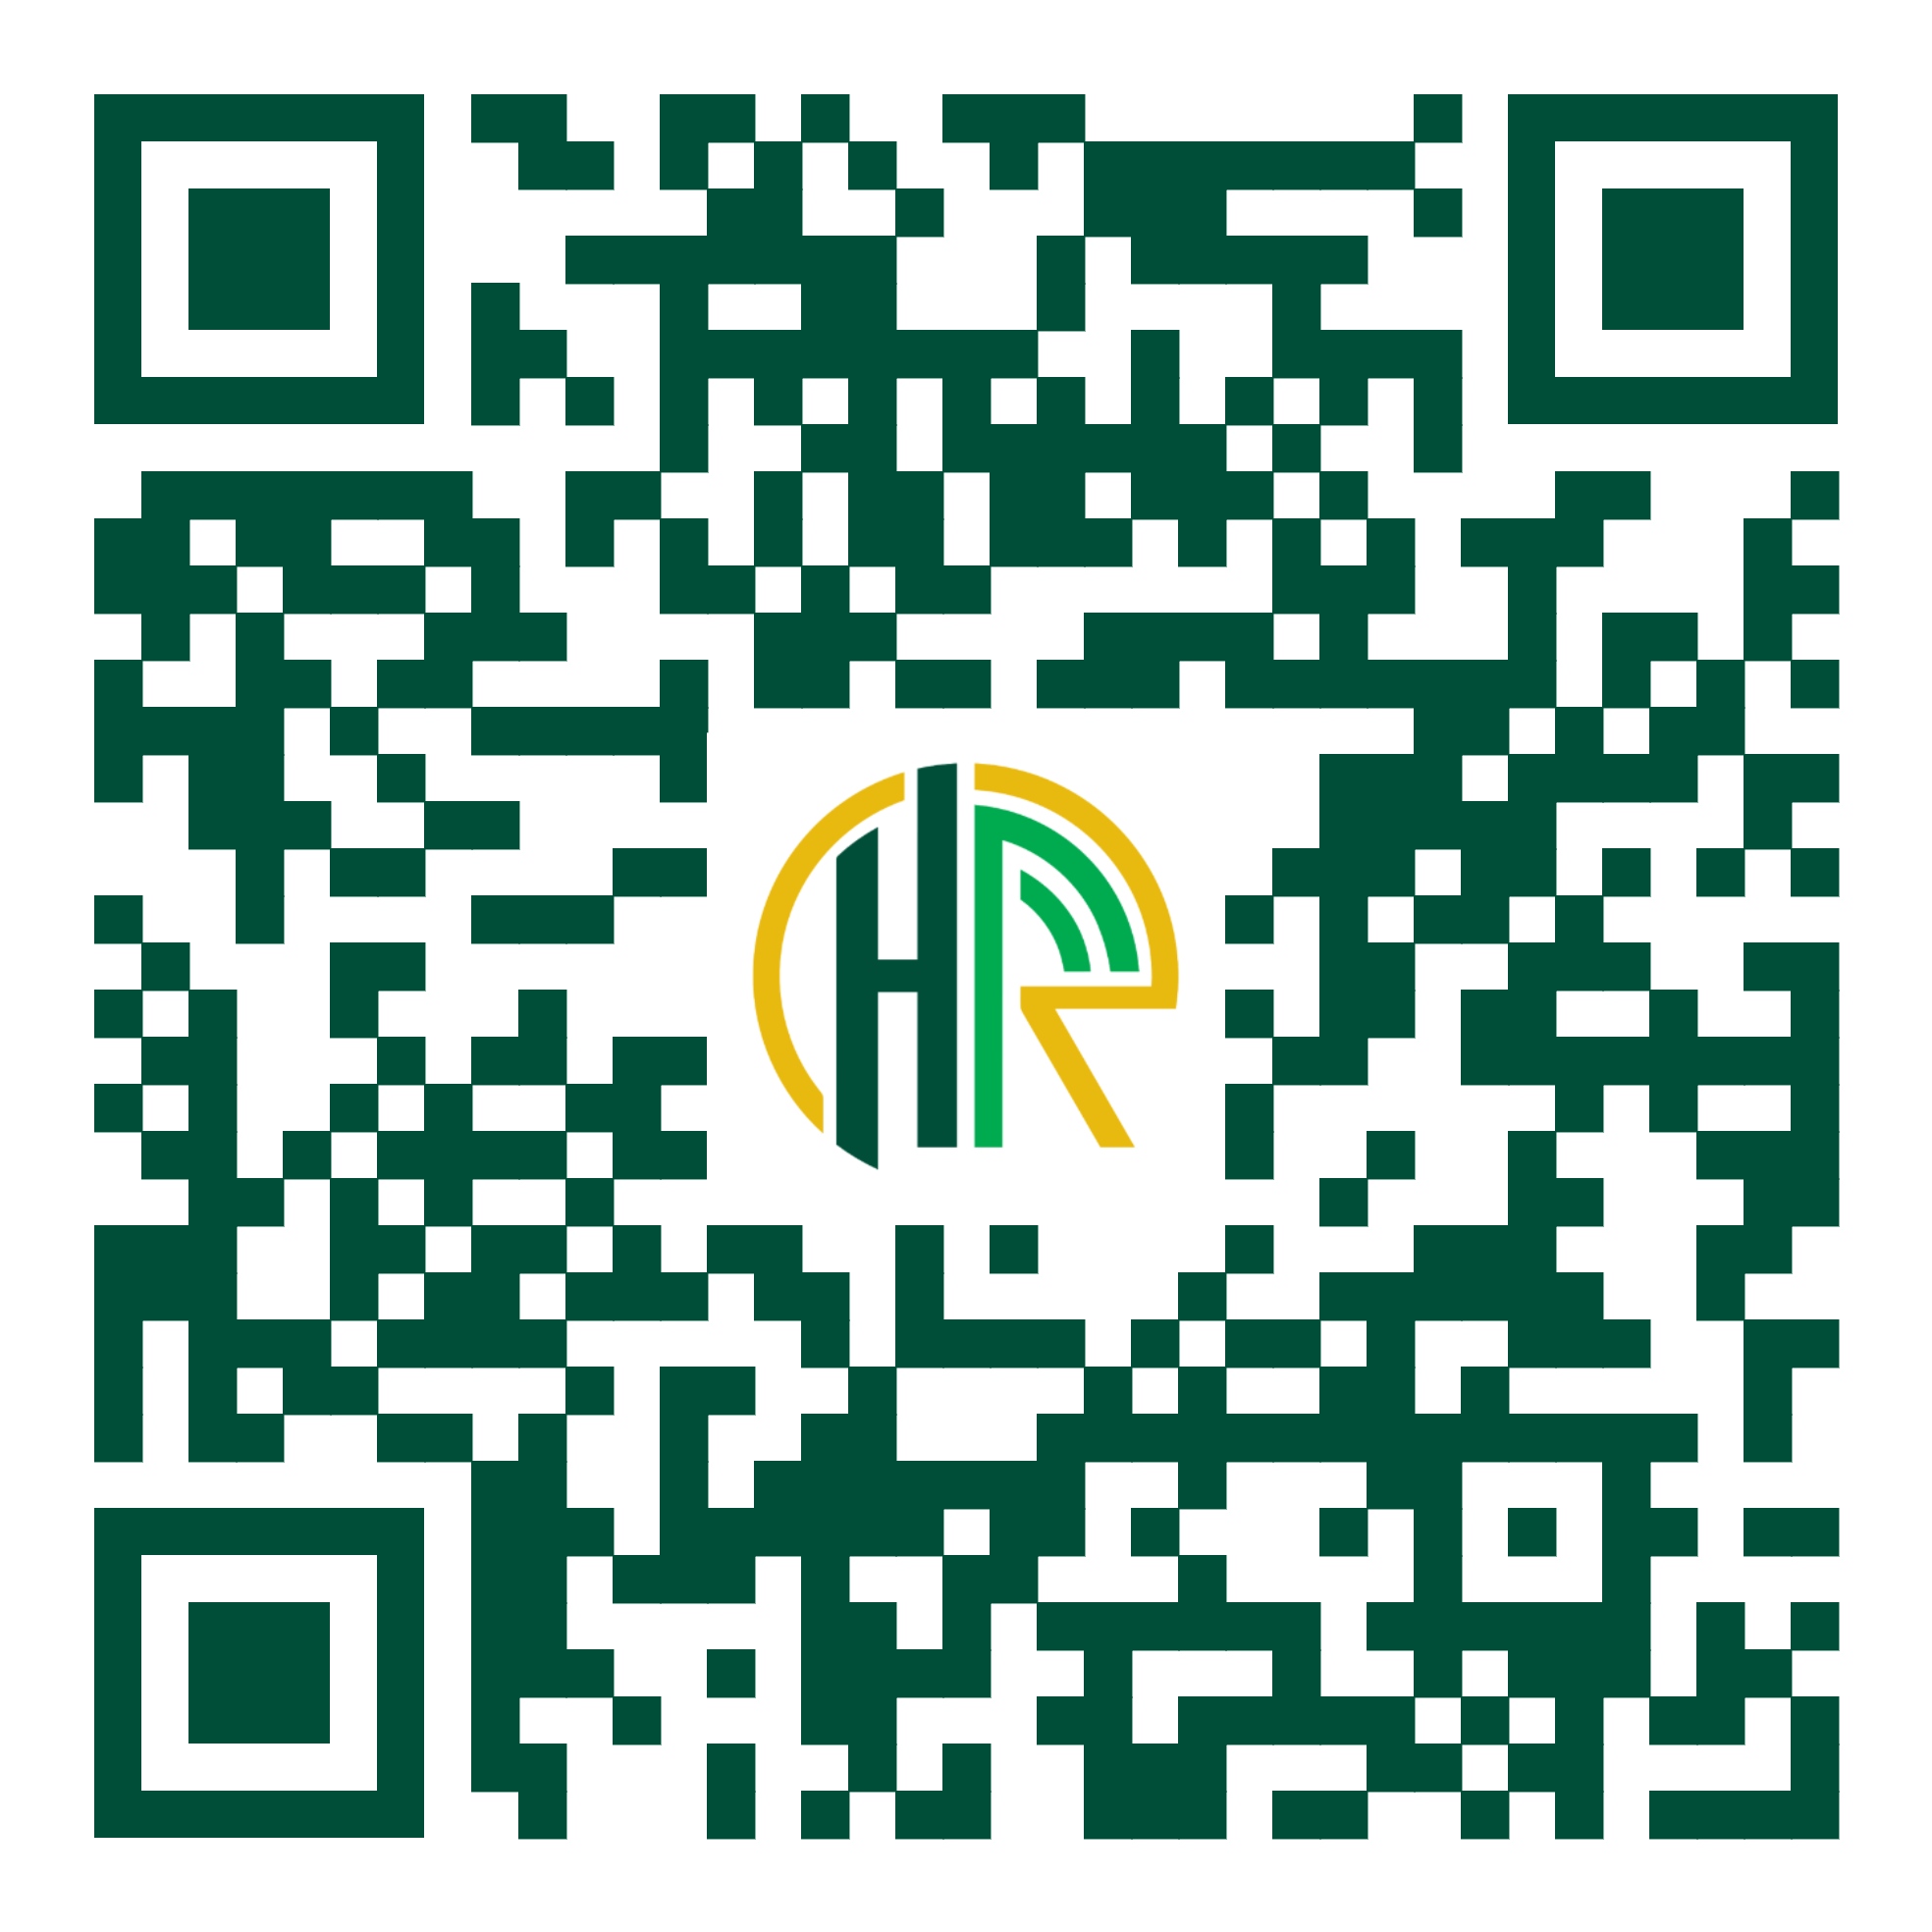 Registration QR cod for Posttraumatic Growth Conference